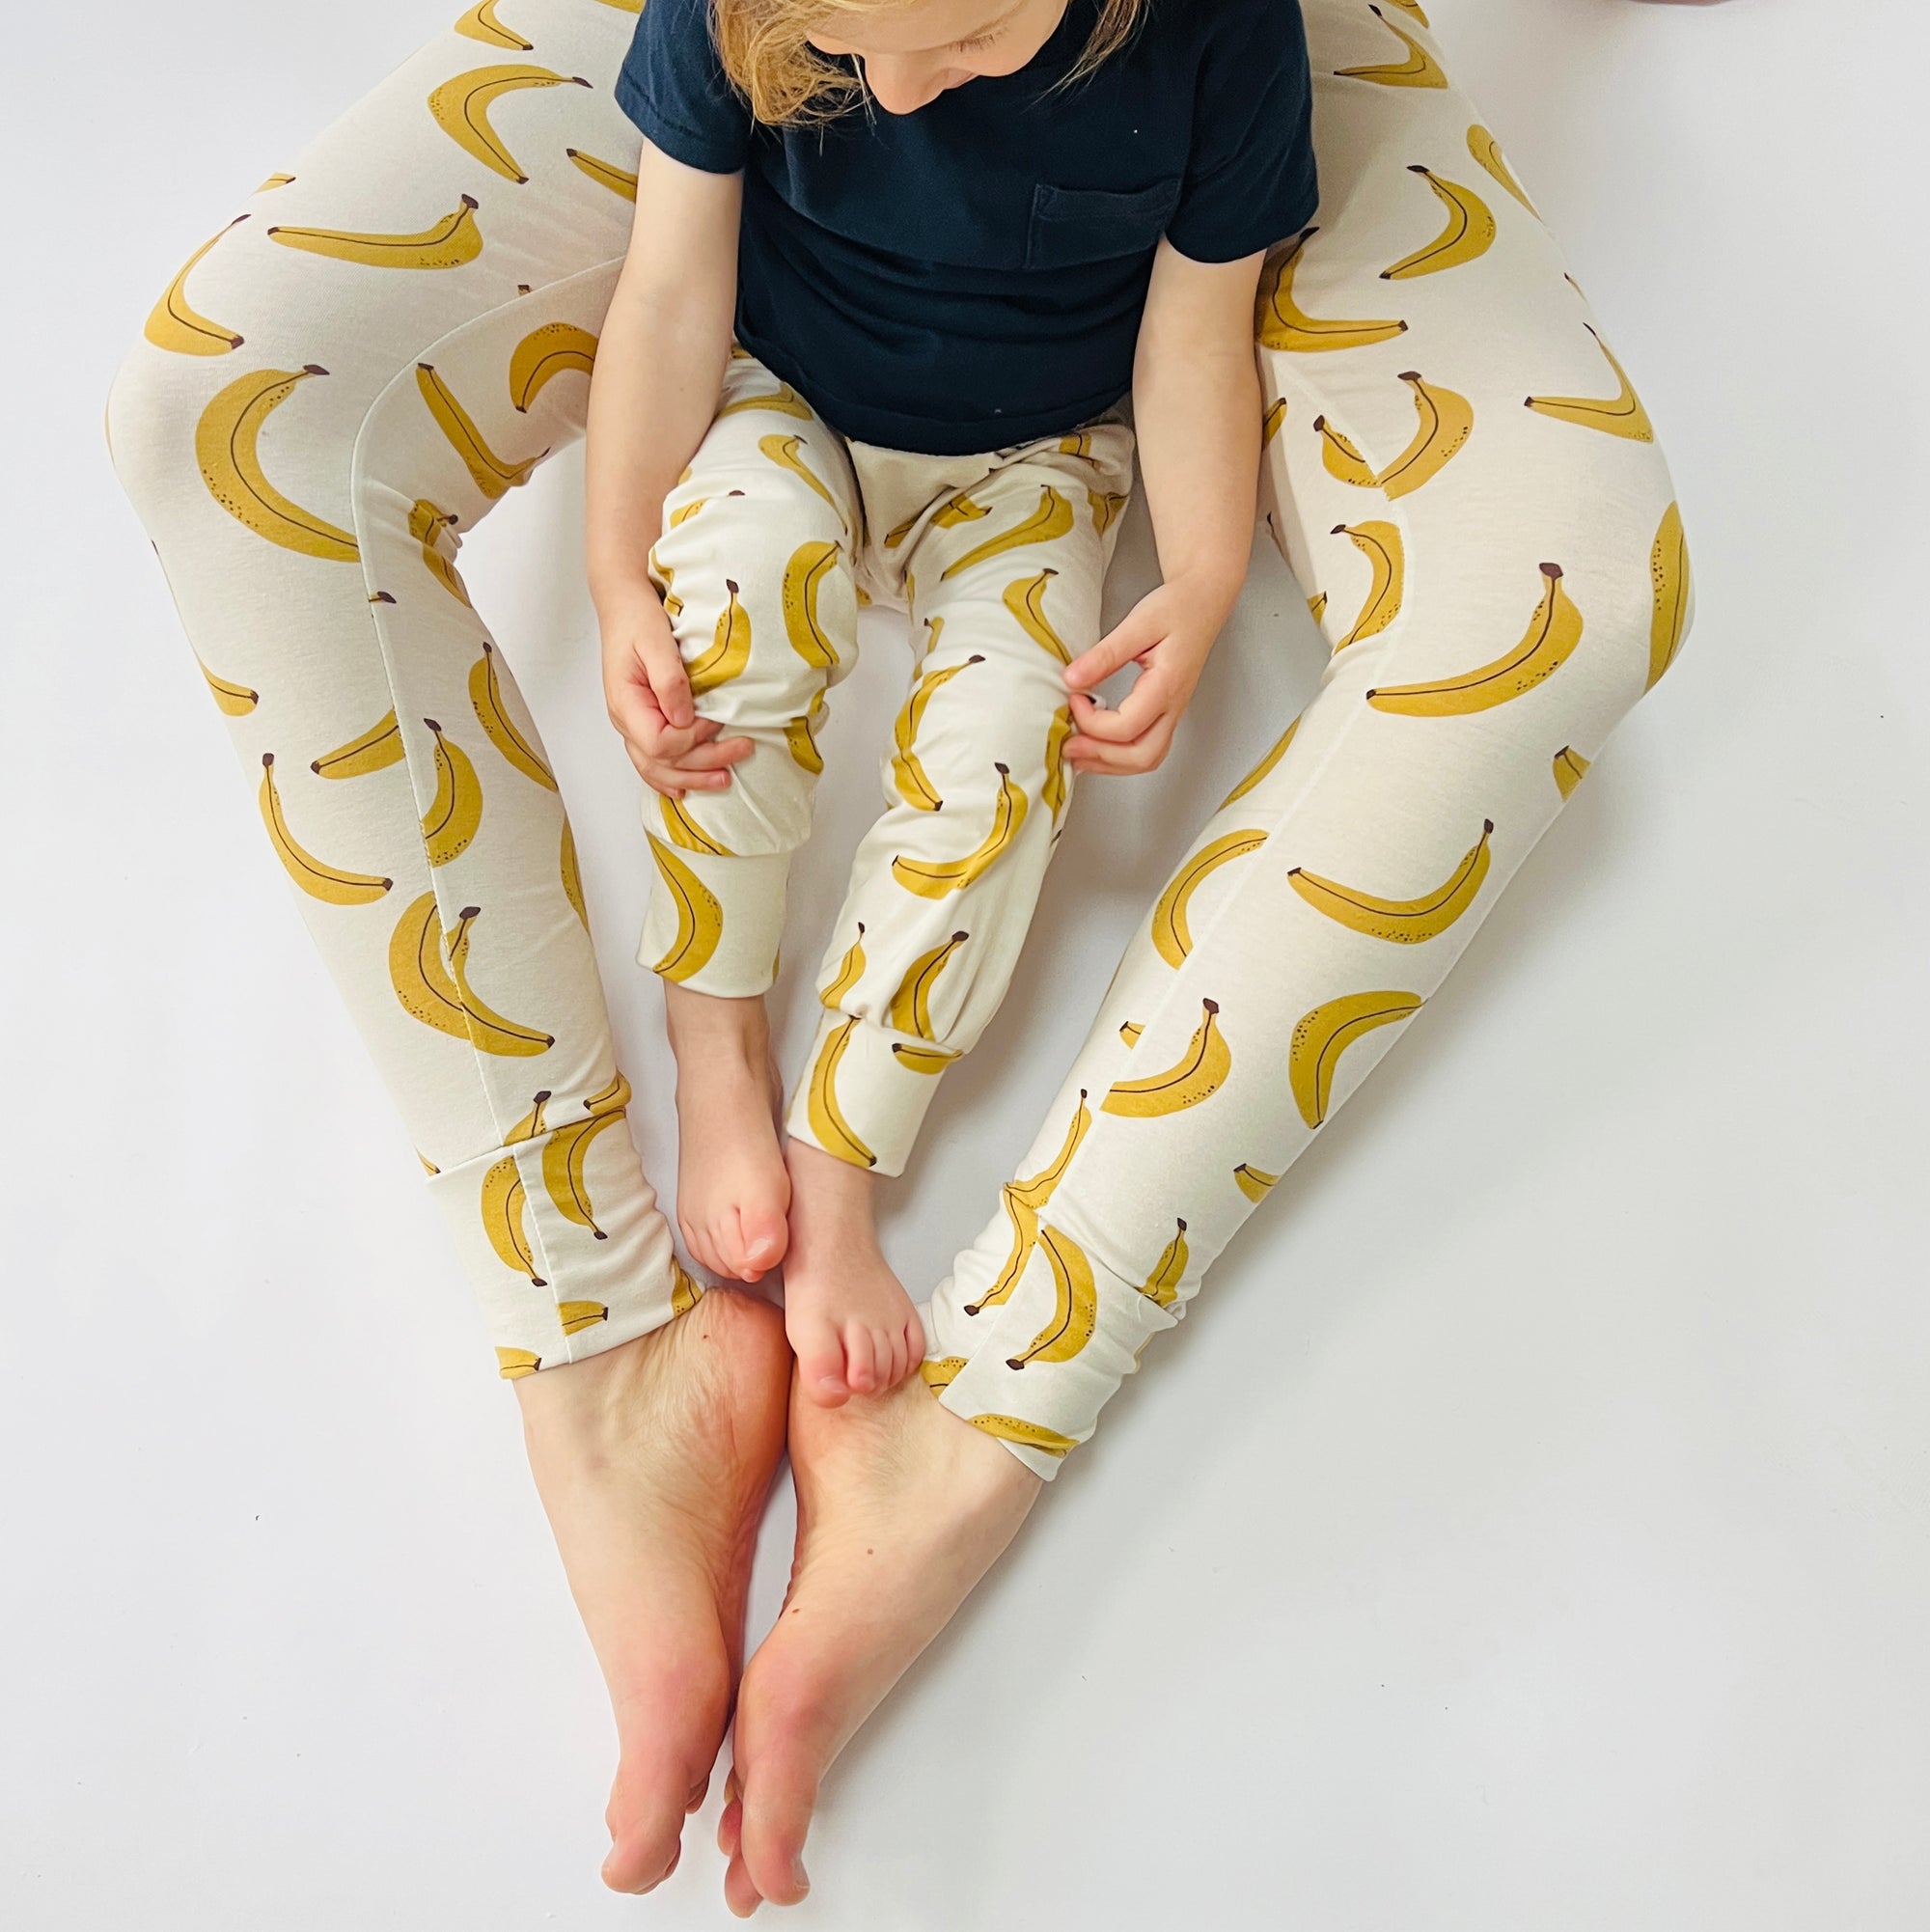 Printed Lean Legging  Organic Cotton Tight by Toad&Co